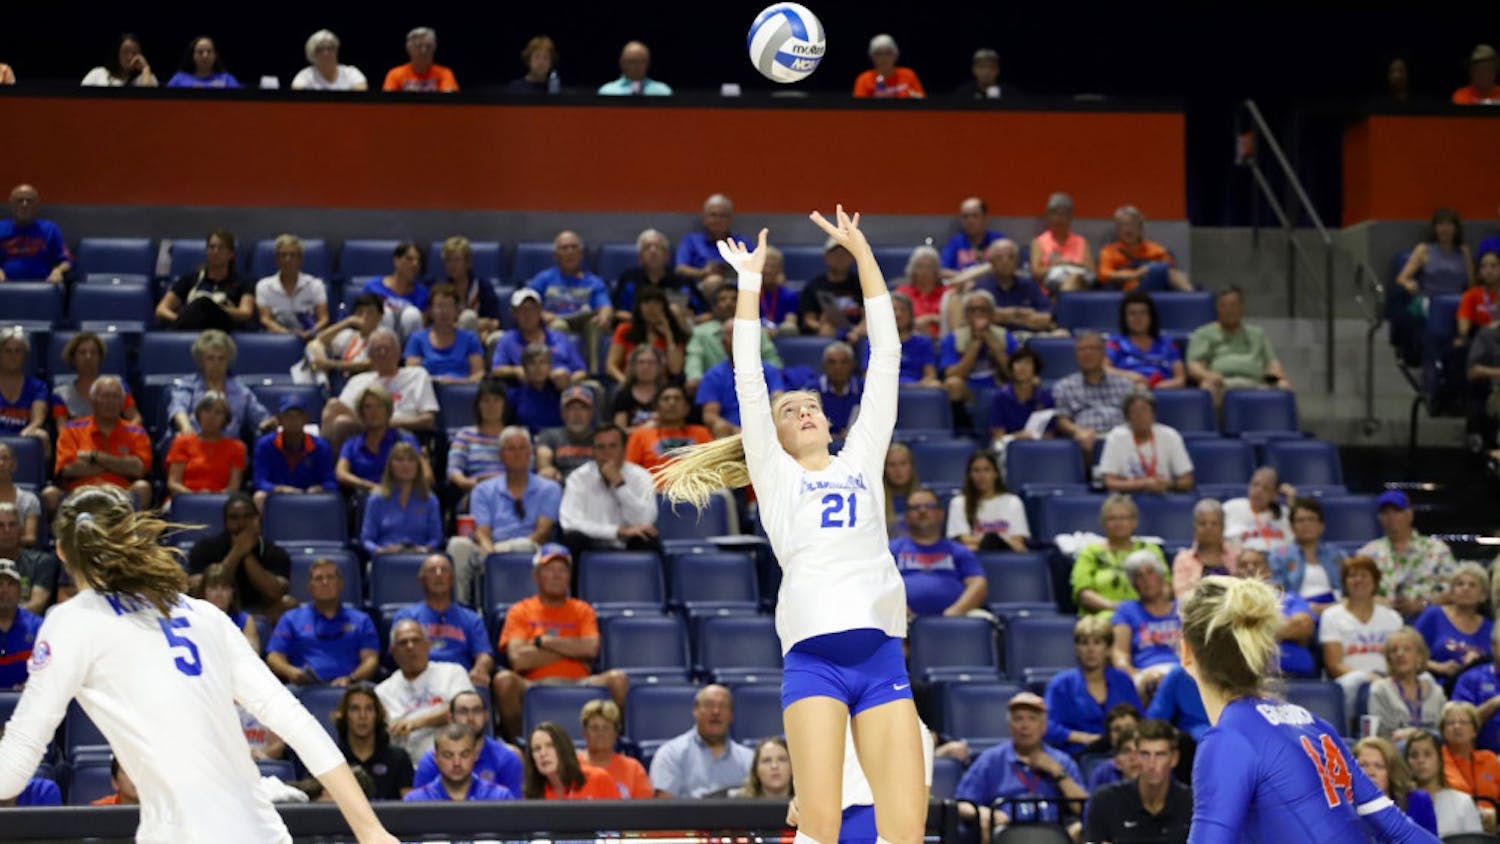 Florida's Marlie Monserez offers up a set during a game in 2019.